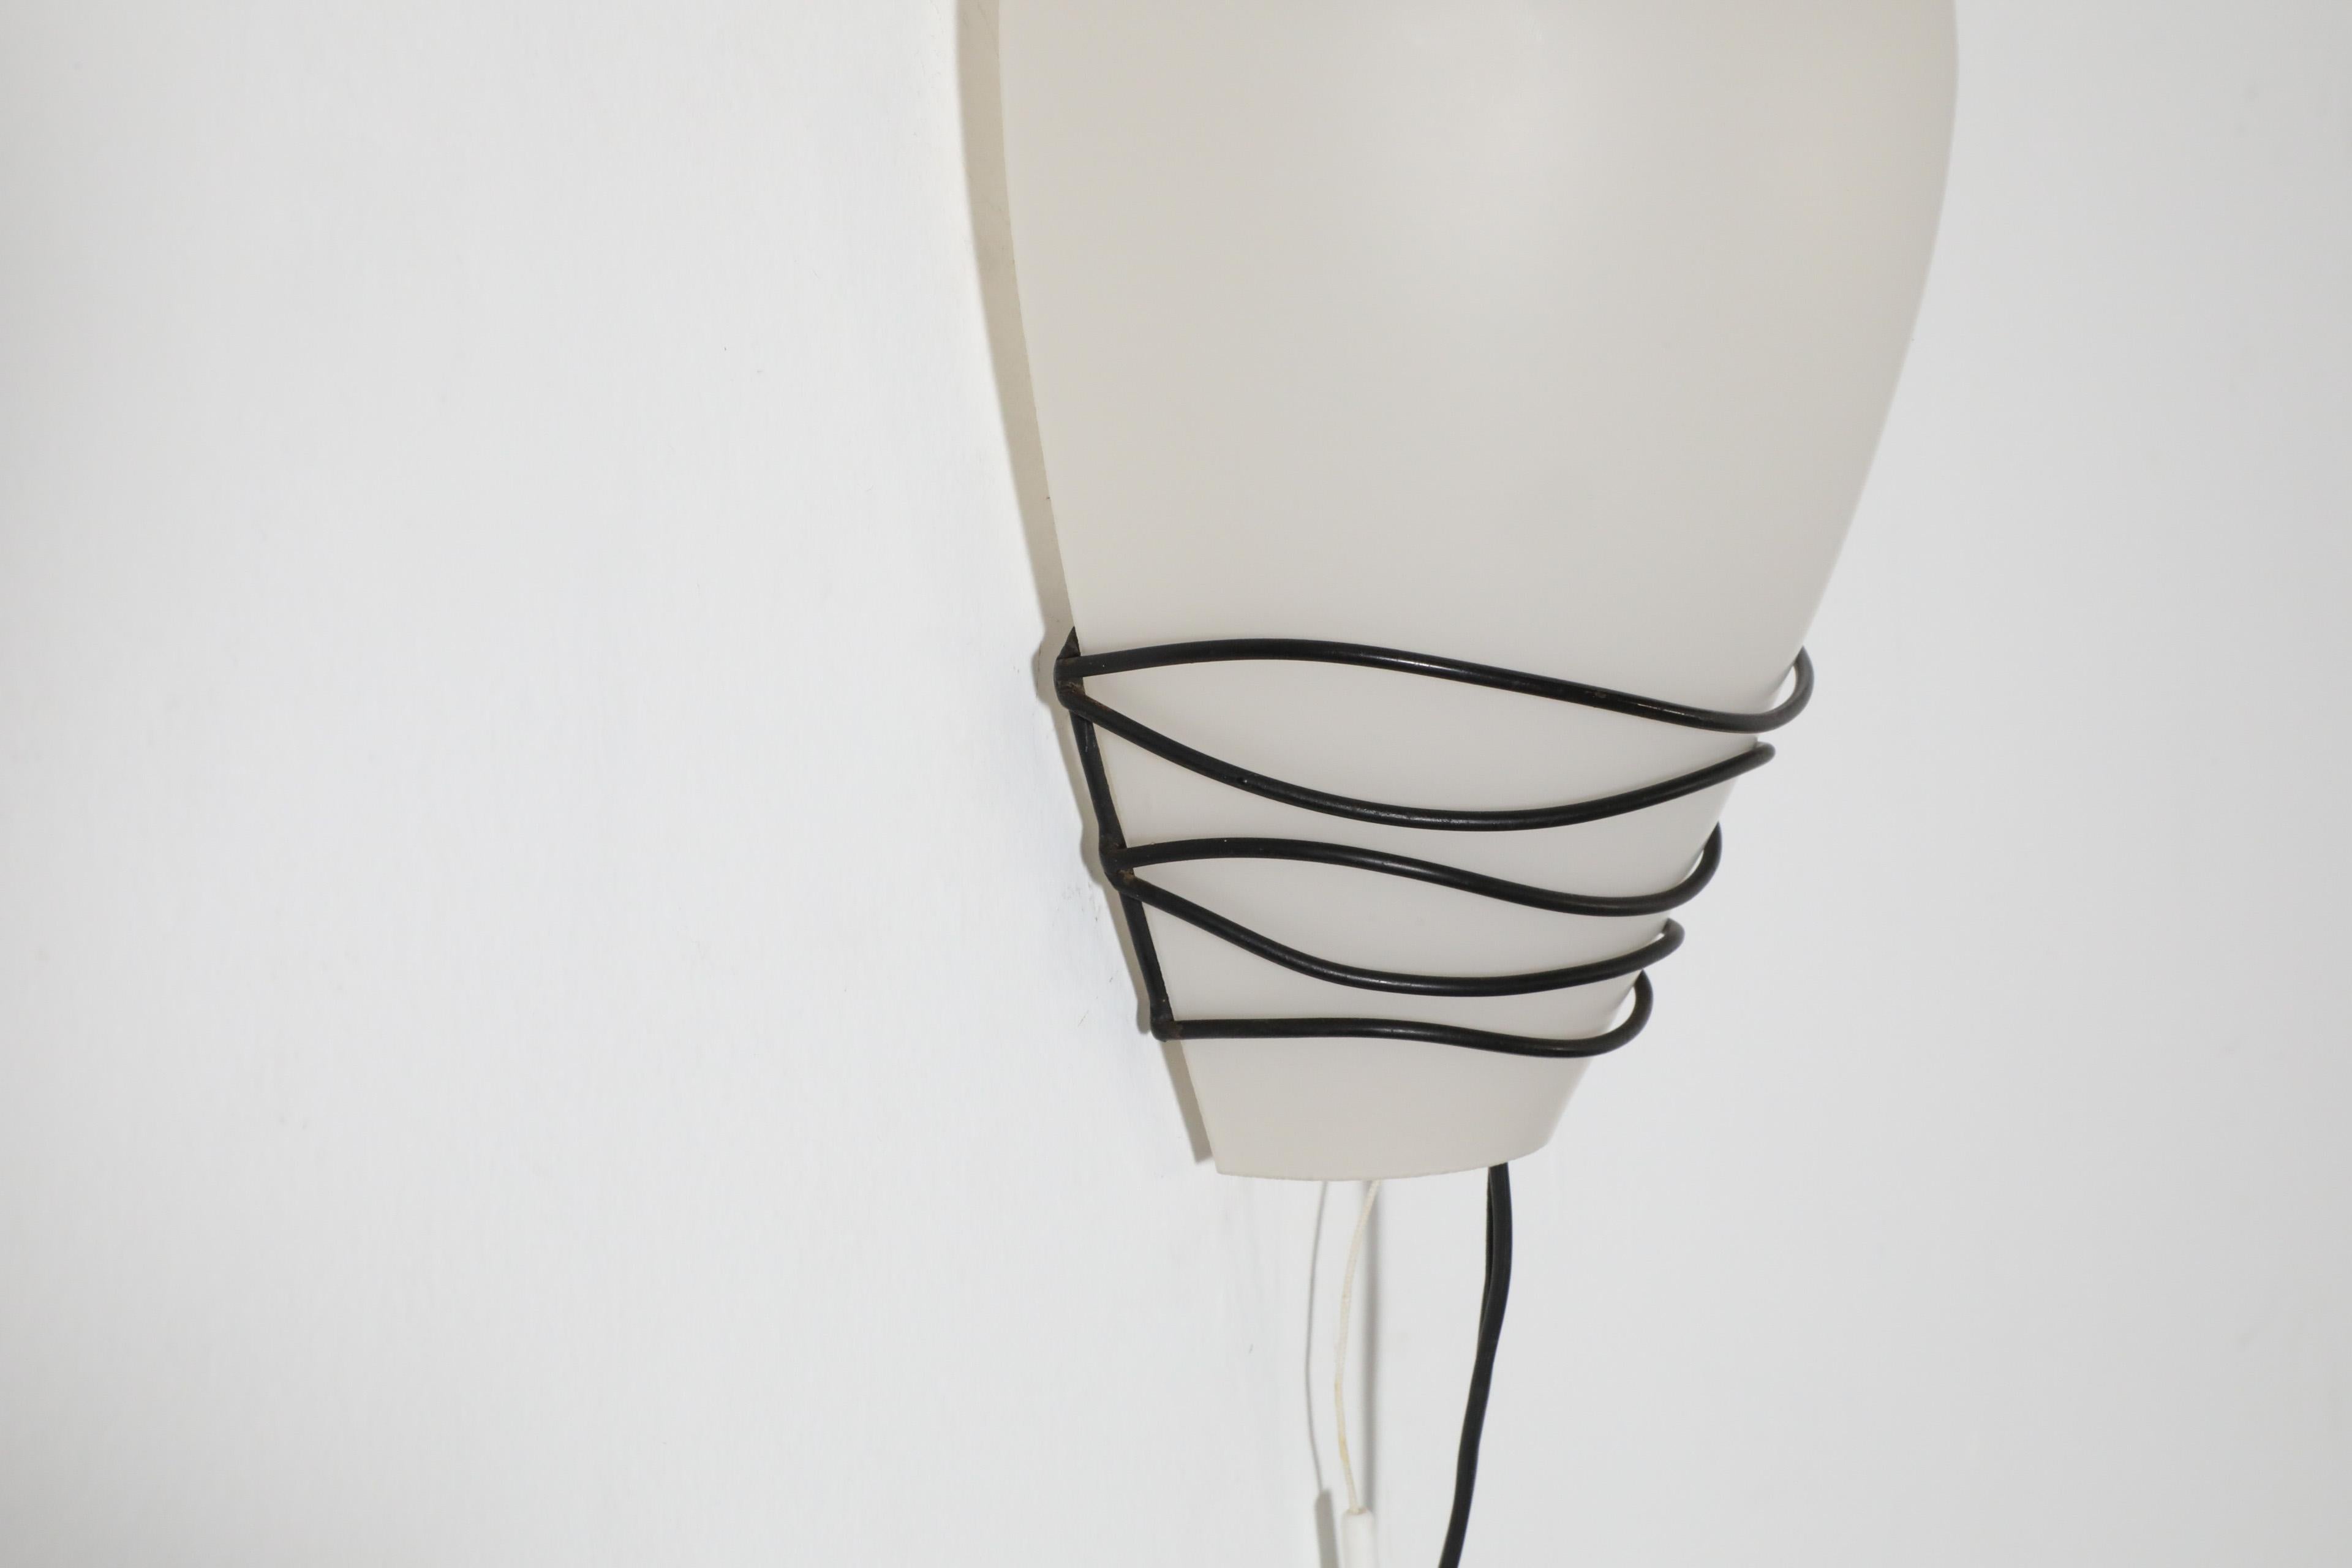 Philips Milk Glass Wall Sconce w/ Black Wire Mount and Milk Glass Shade, 1950's For Sale 5